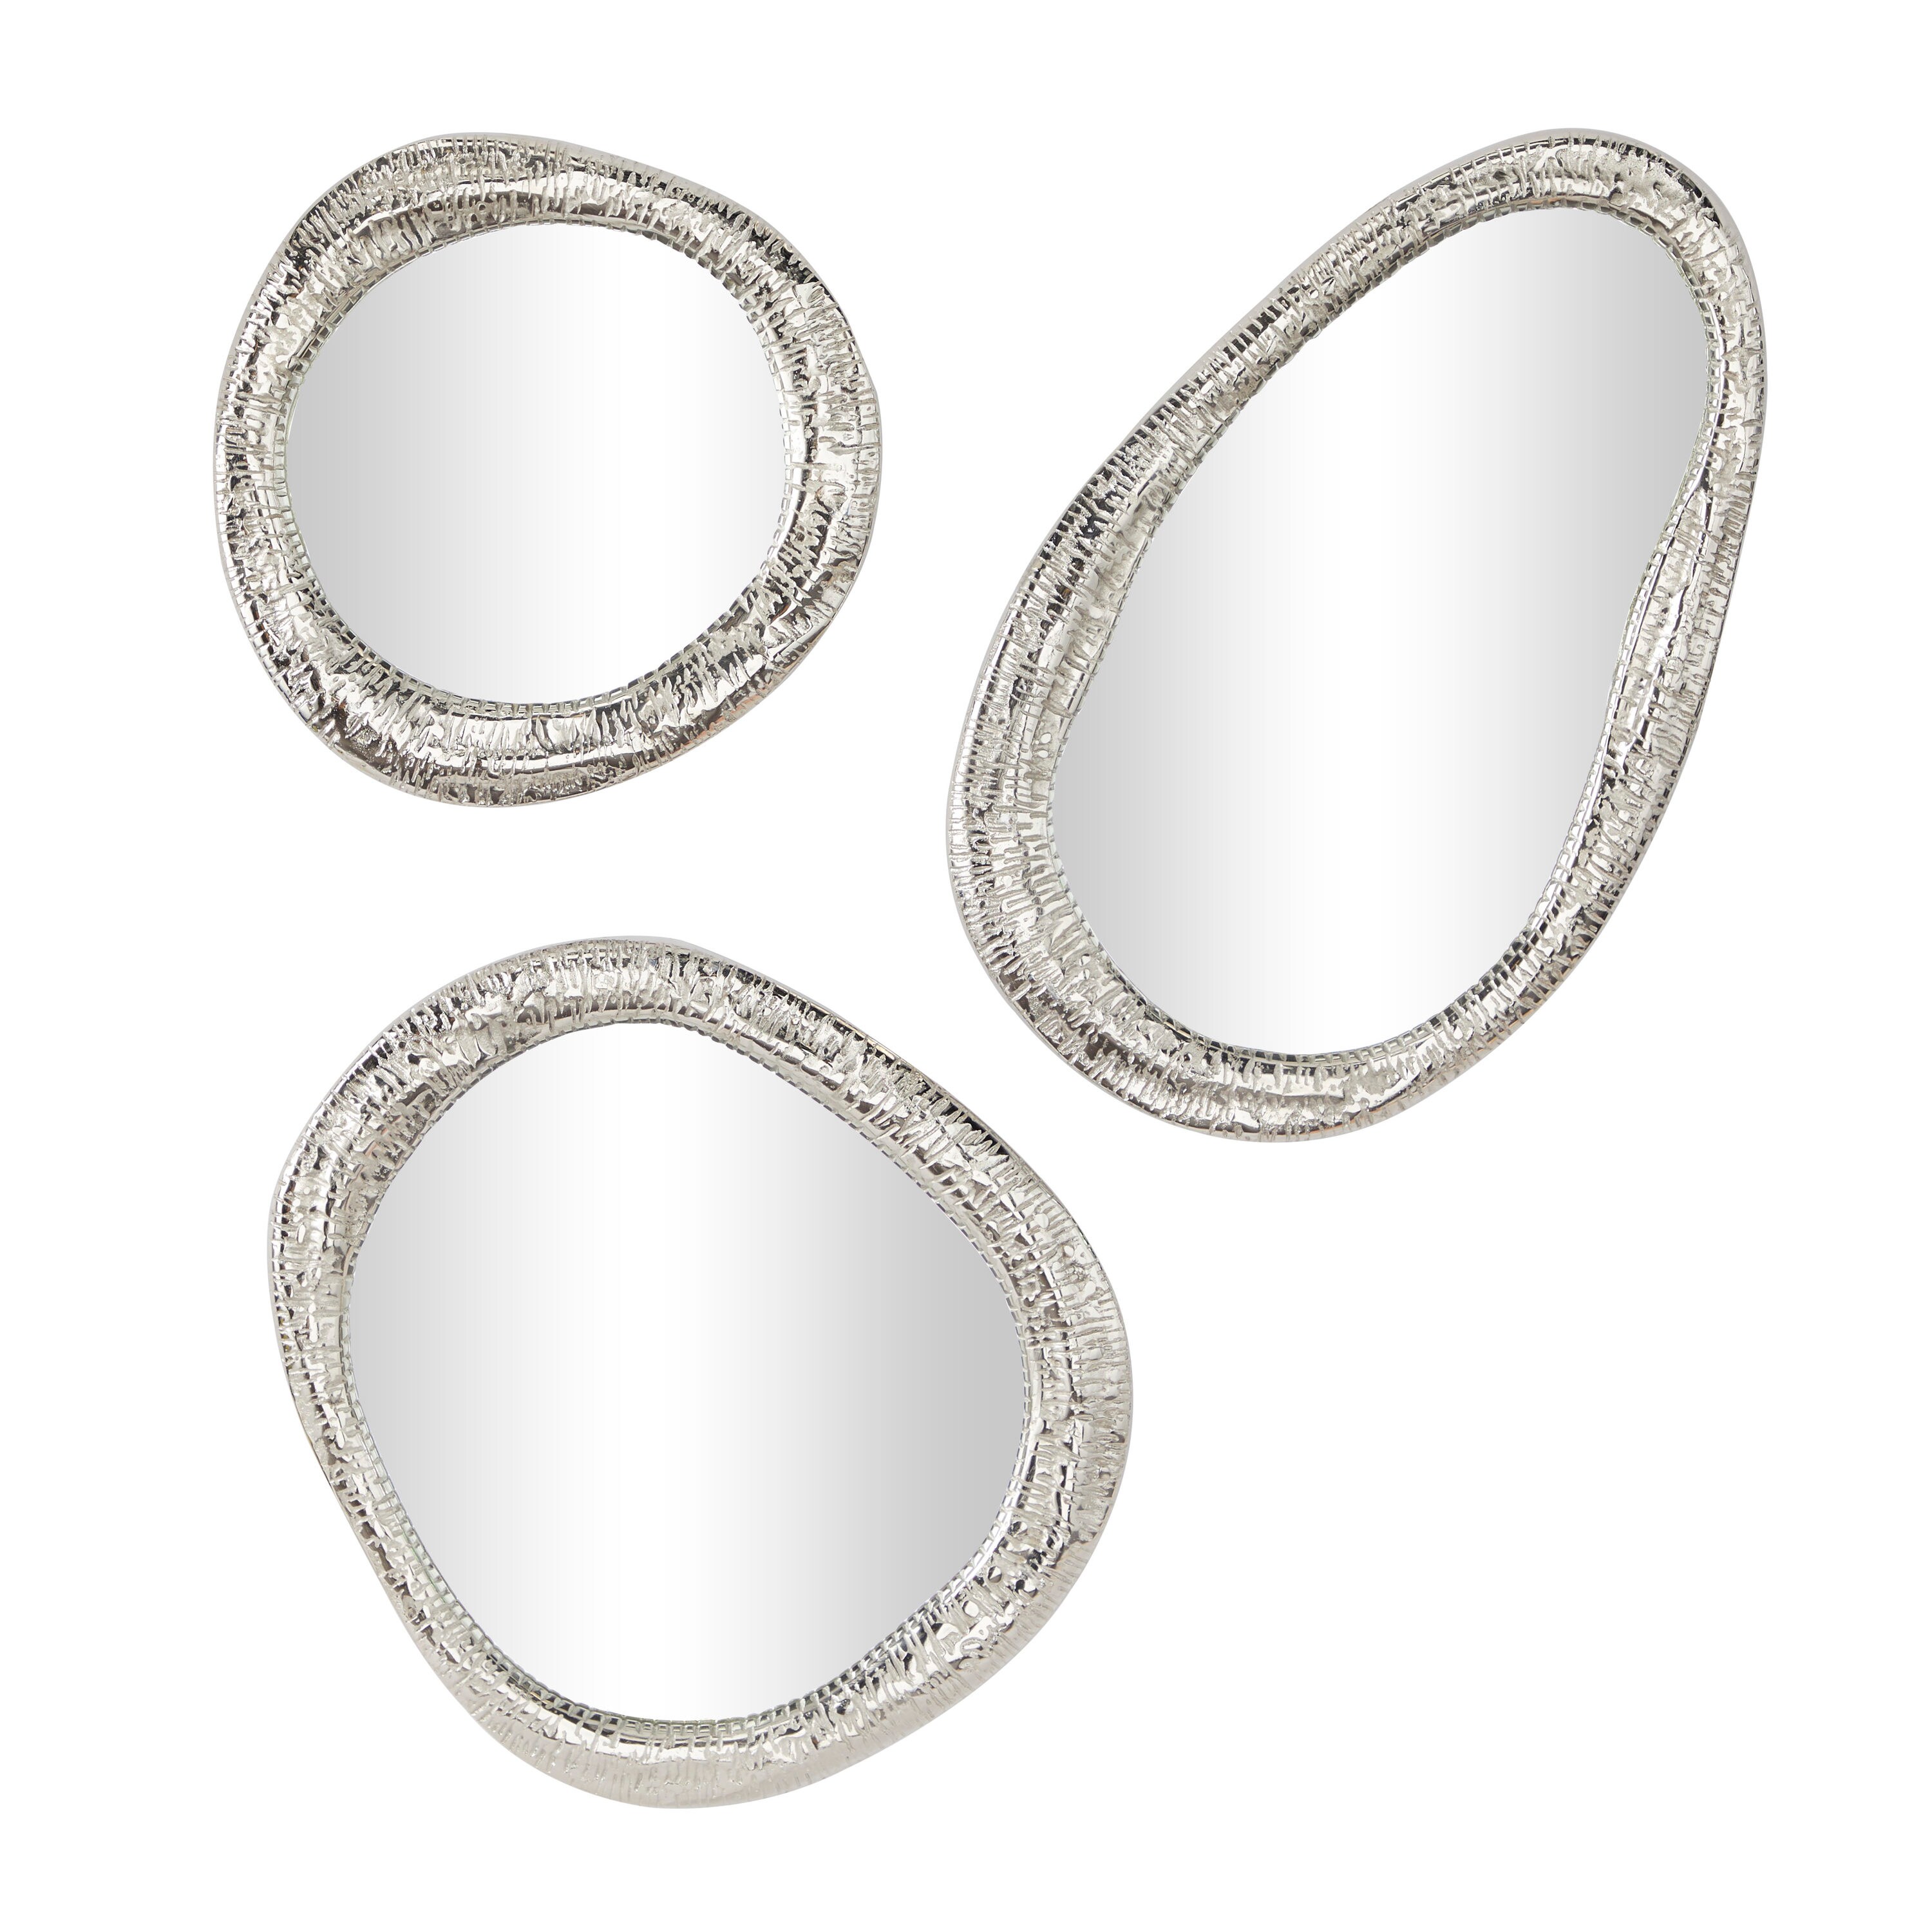 Small (Under 16-in H) Mirrors at